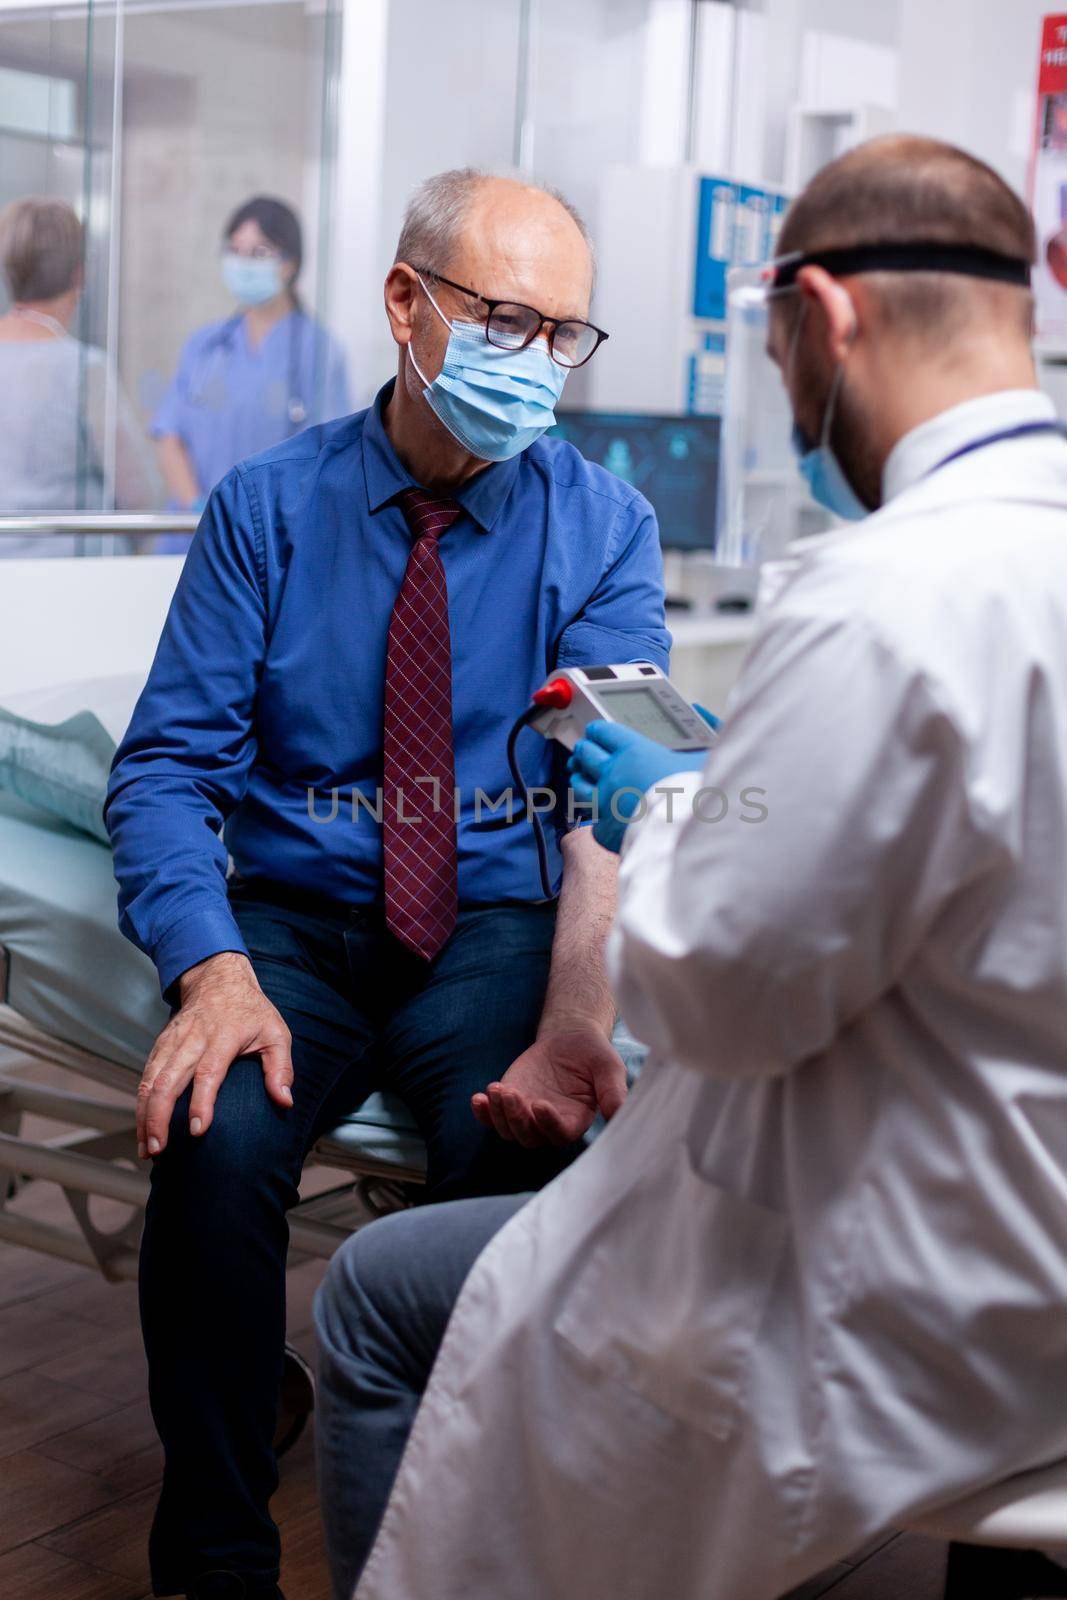 Doctor with protective mask against coronavirus measuring blood pressure of elderly man in hospital. Medical examination for infections, disease and diagnosis.